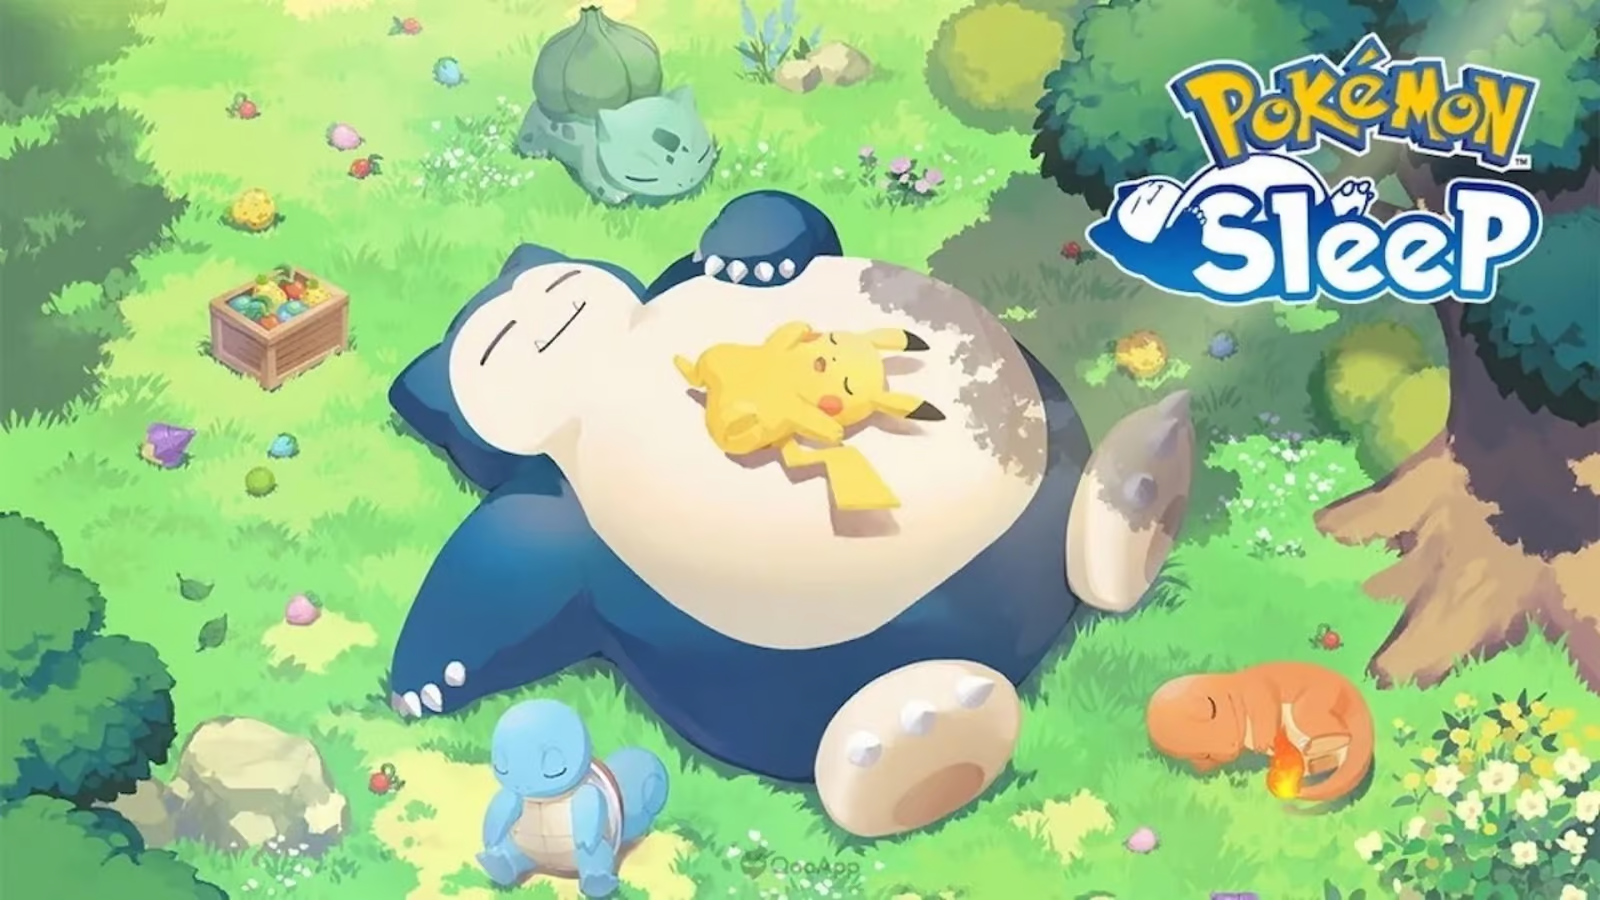 Pokémon Sleep Is Now Available on the App Store and Google Play